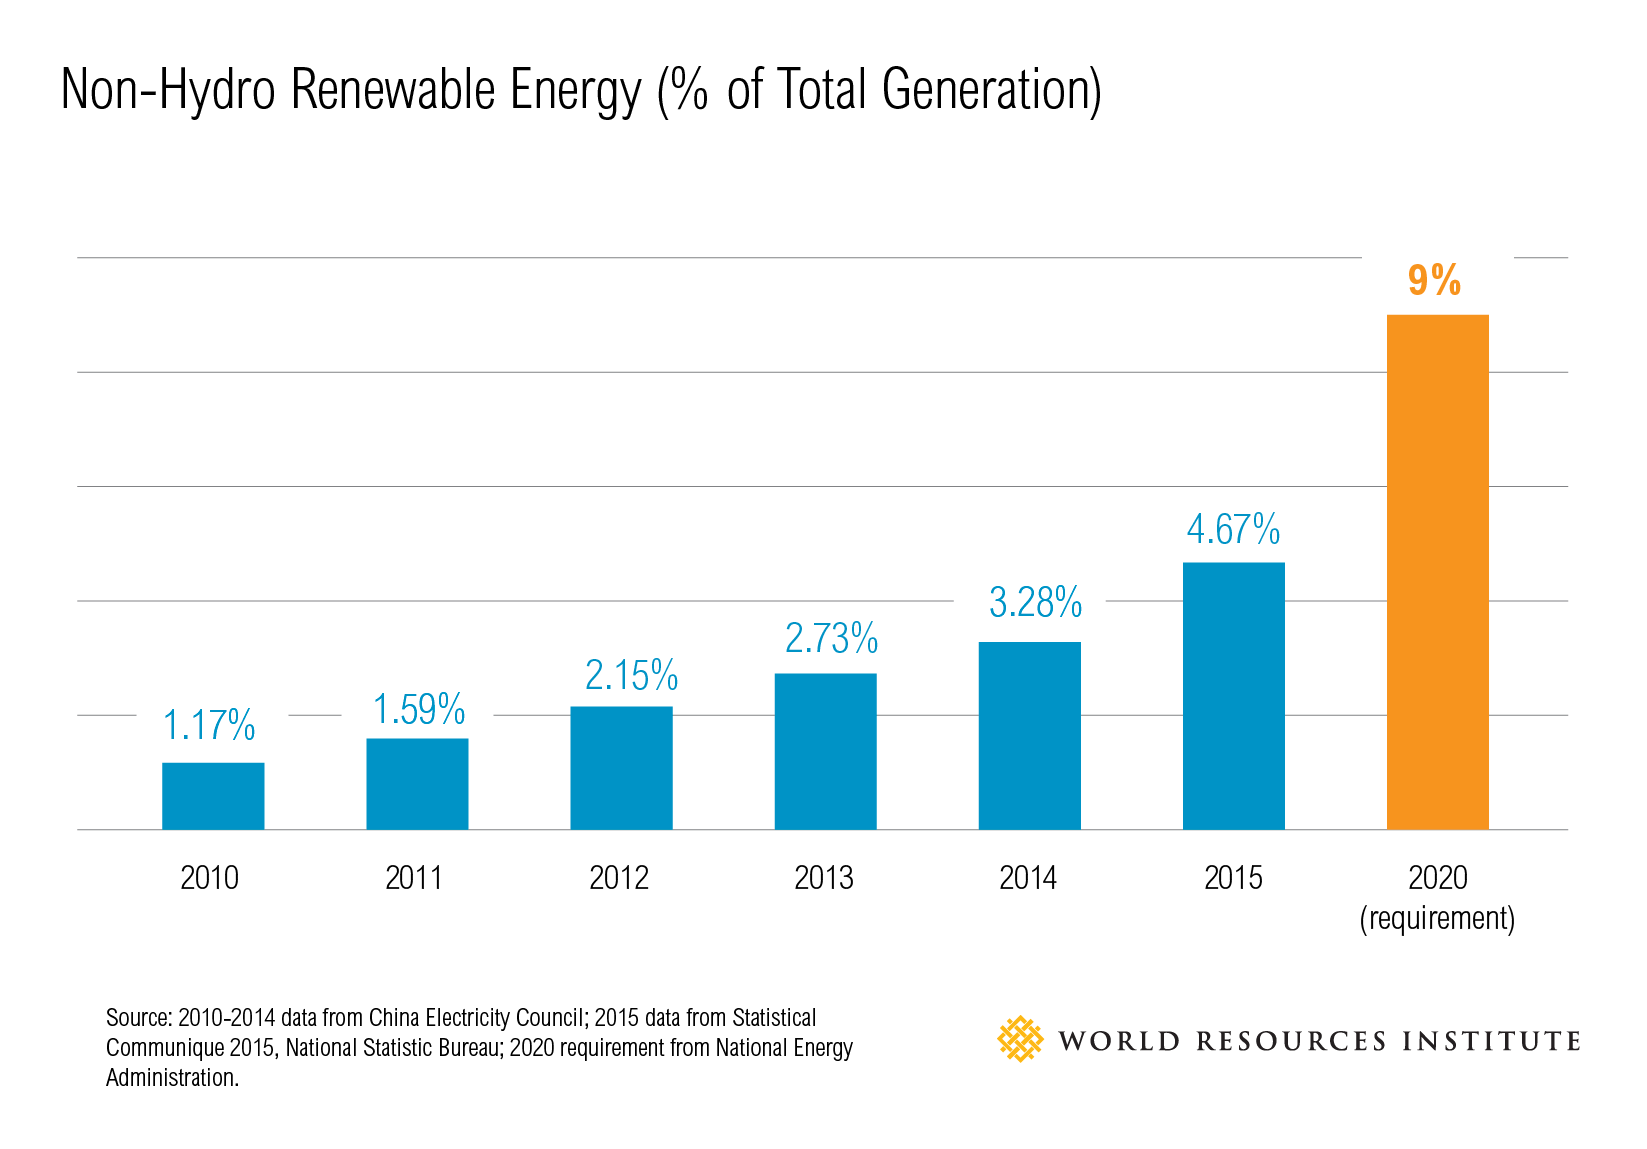 graph of increase in non-hydro renewable energy generation from 2010 to 2020 